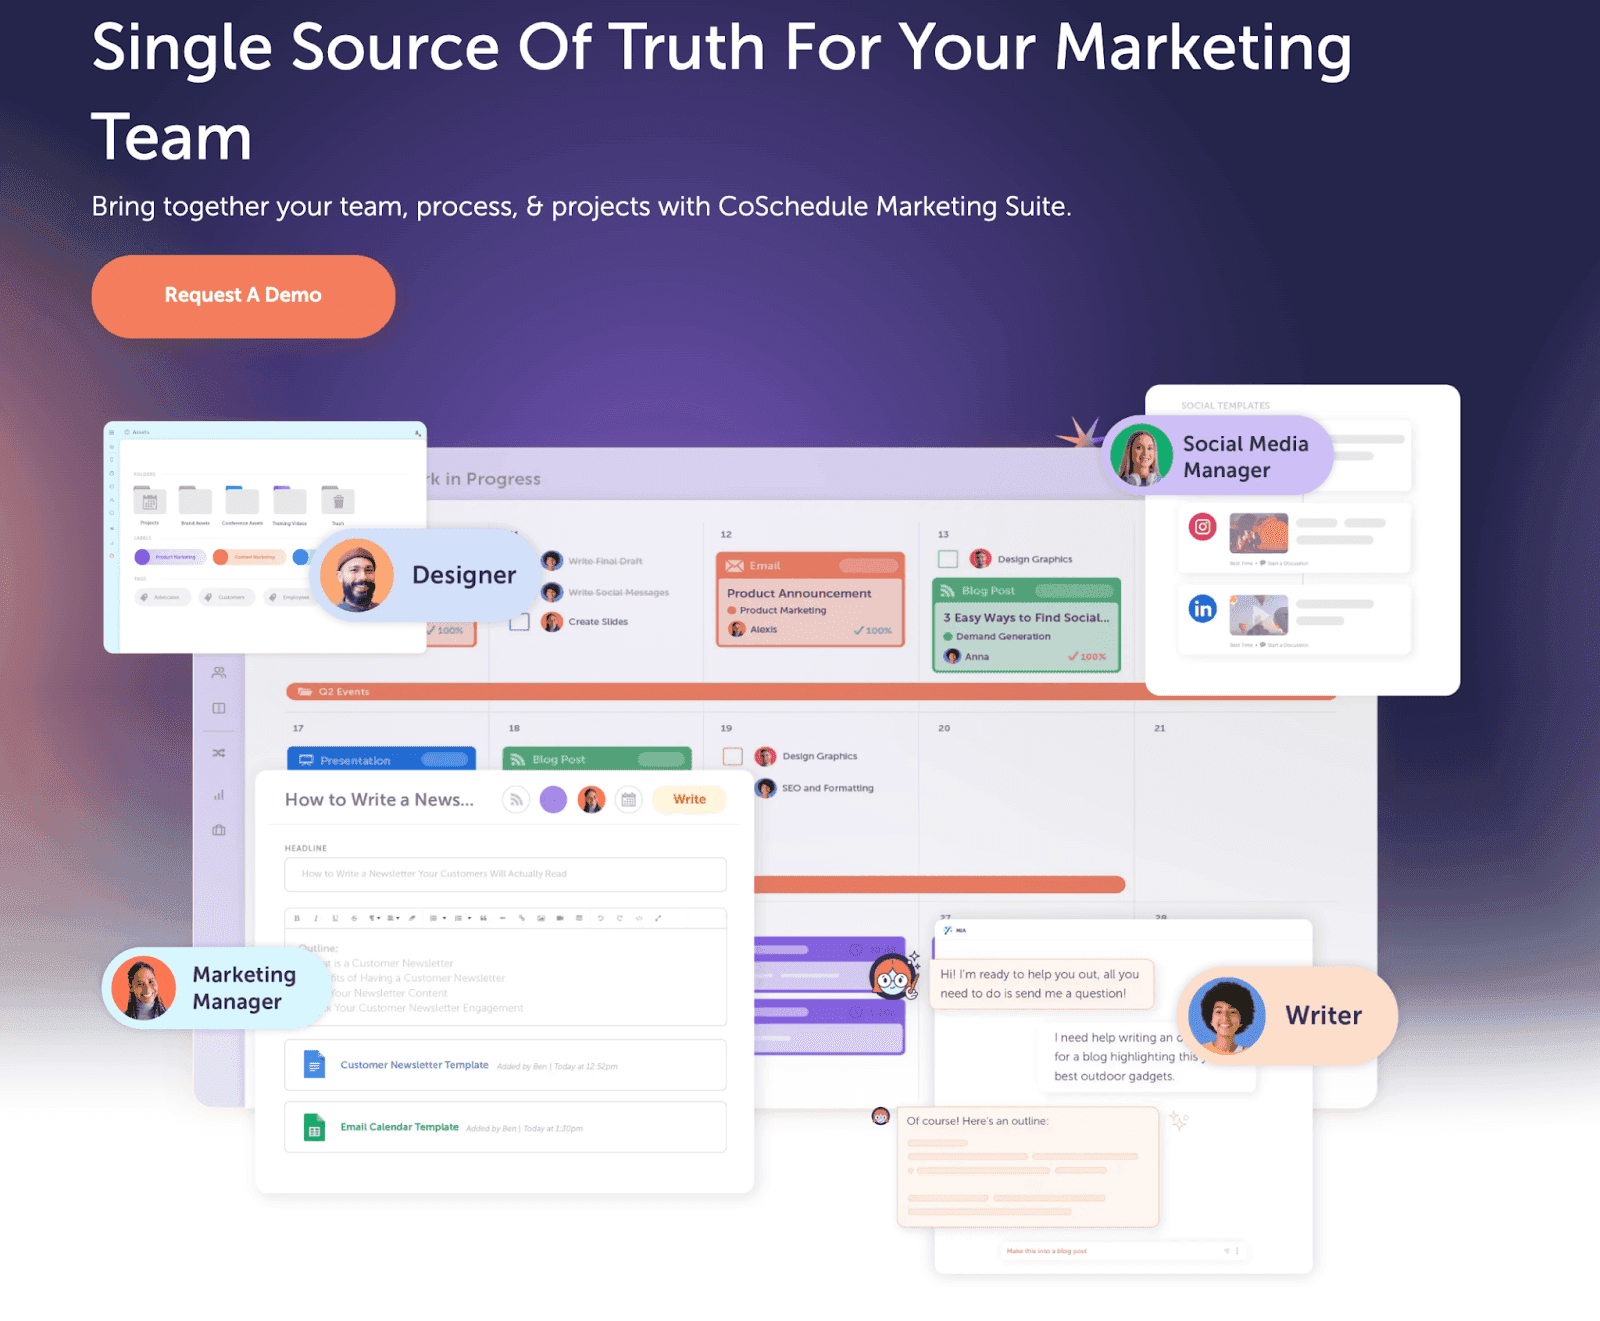 Single source of truth for your marketing team with "request a demo" call to action